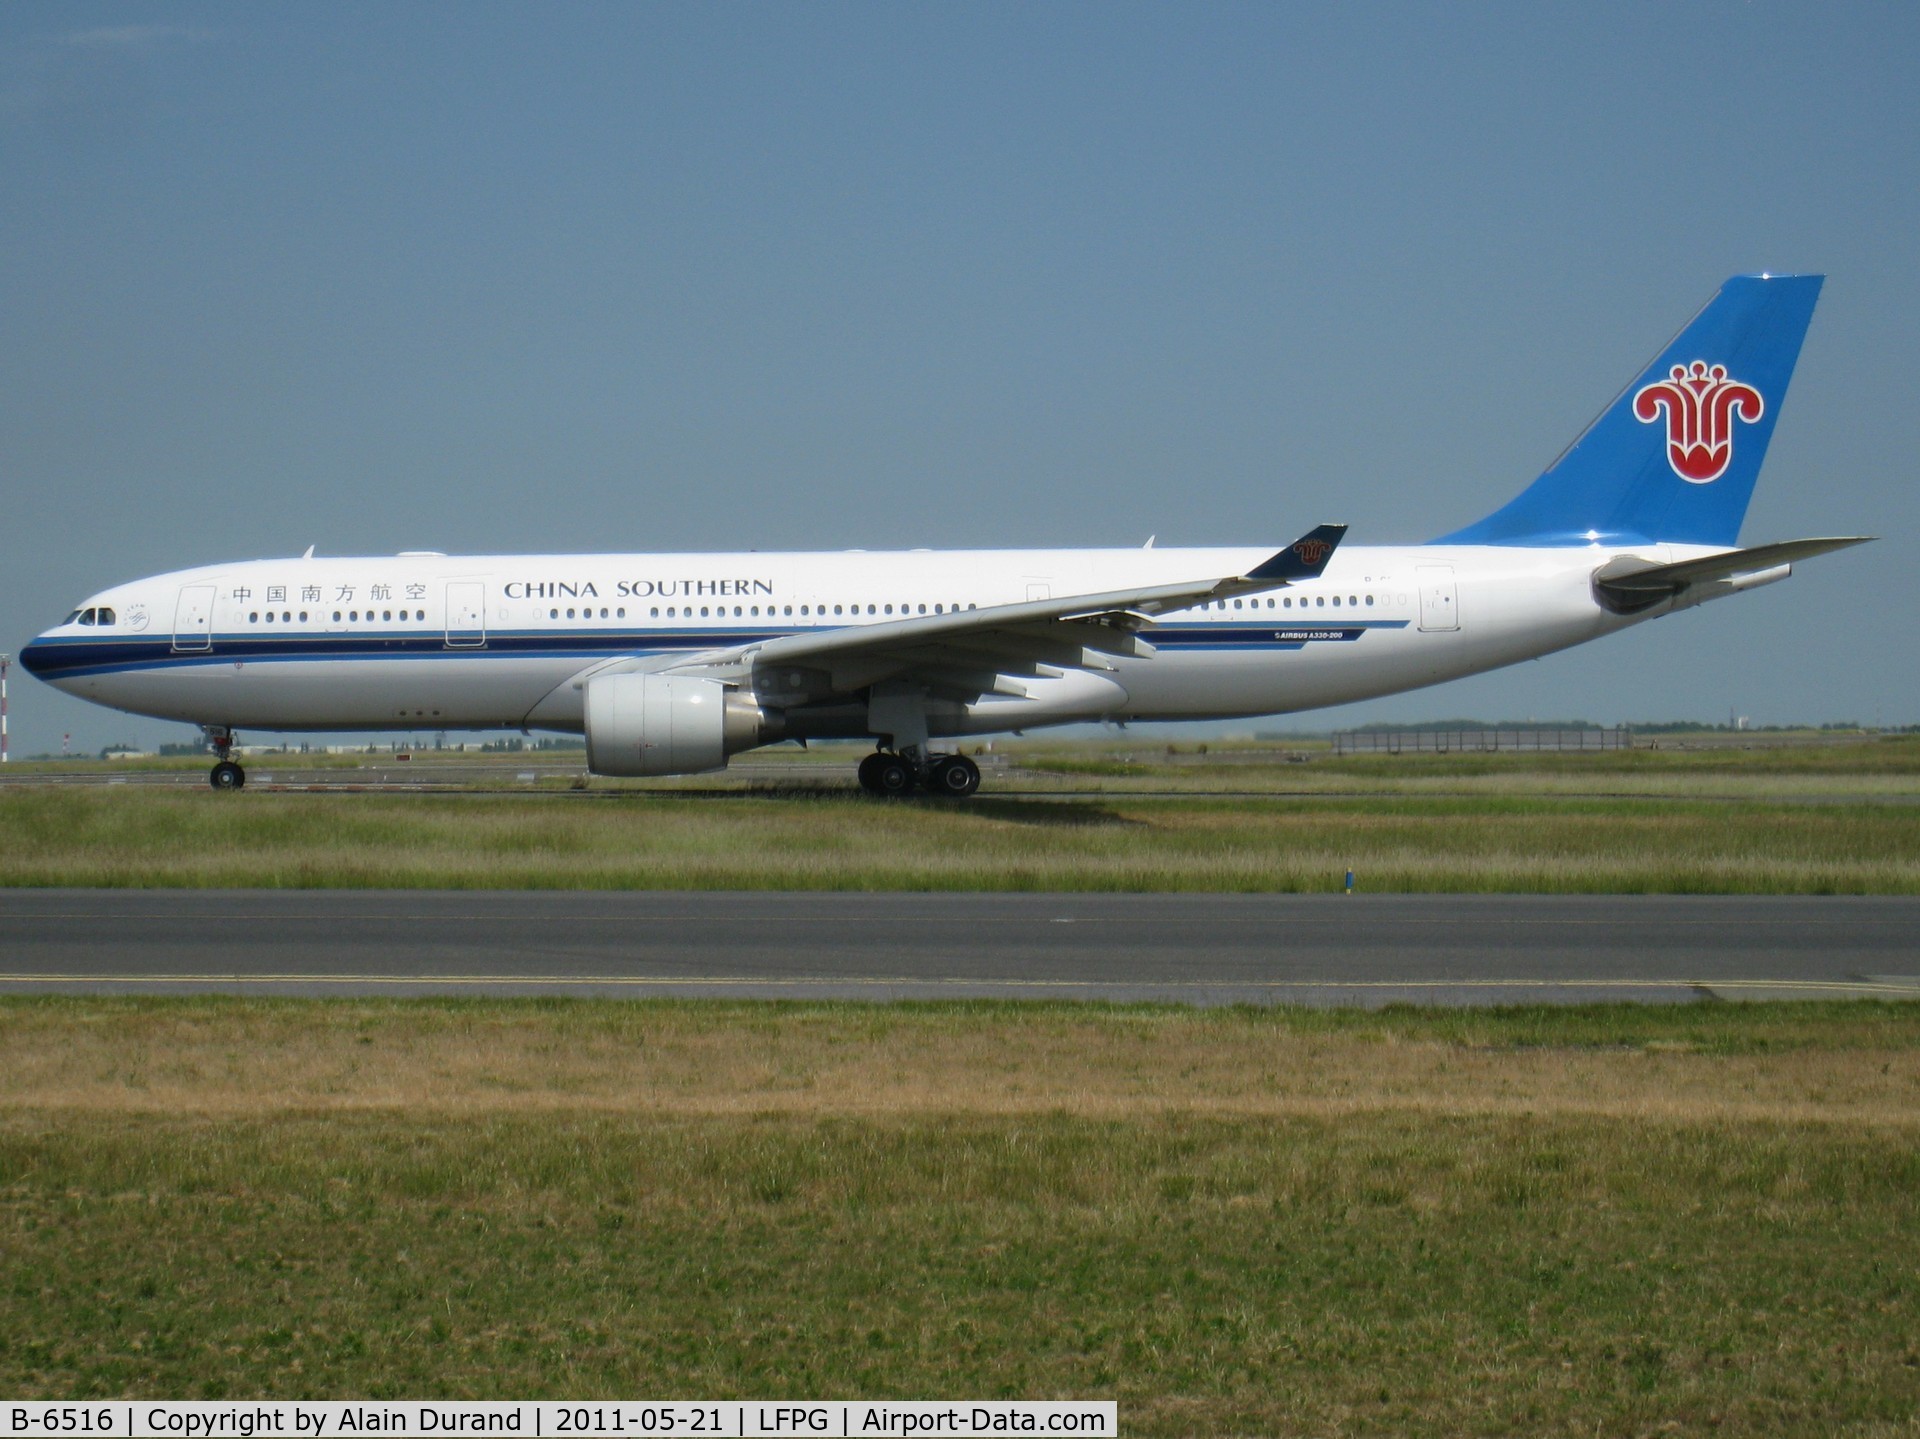 B-6516, 2010 Airbus A330-223 C/N 1129, Taxying to runway 09R. China Southern initially served CDG with 777-200s which were superseeded by the A330-200s coming along with the upgrade to daily frequency.